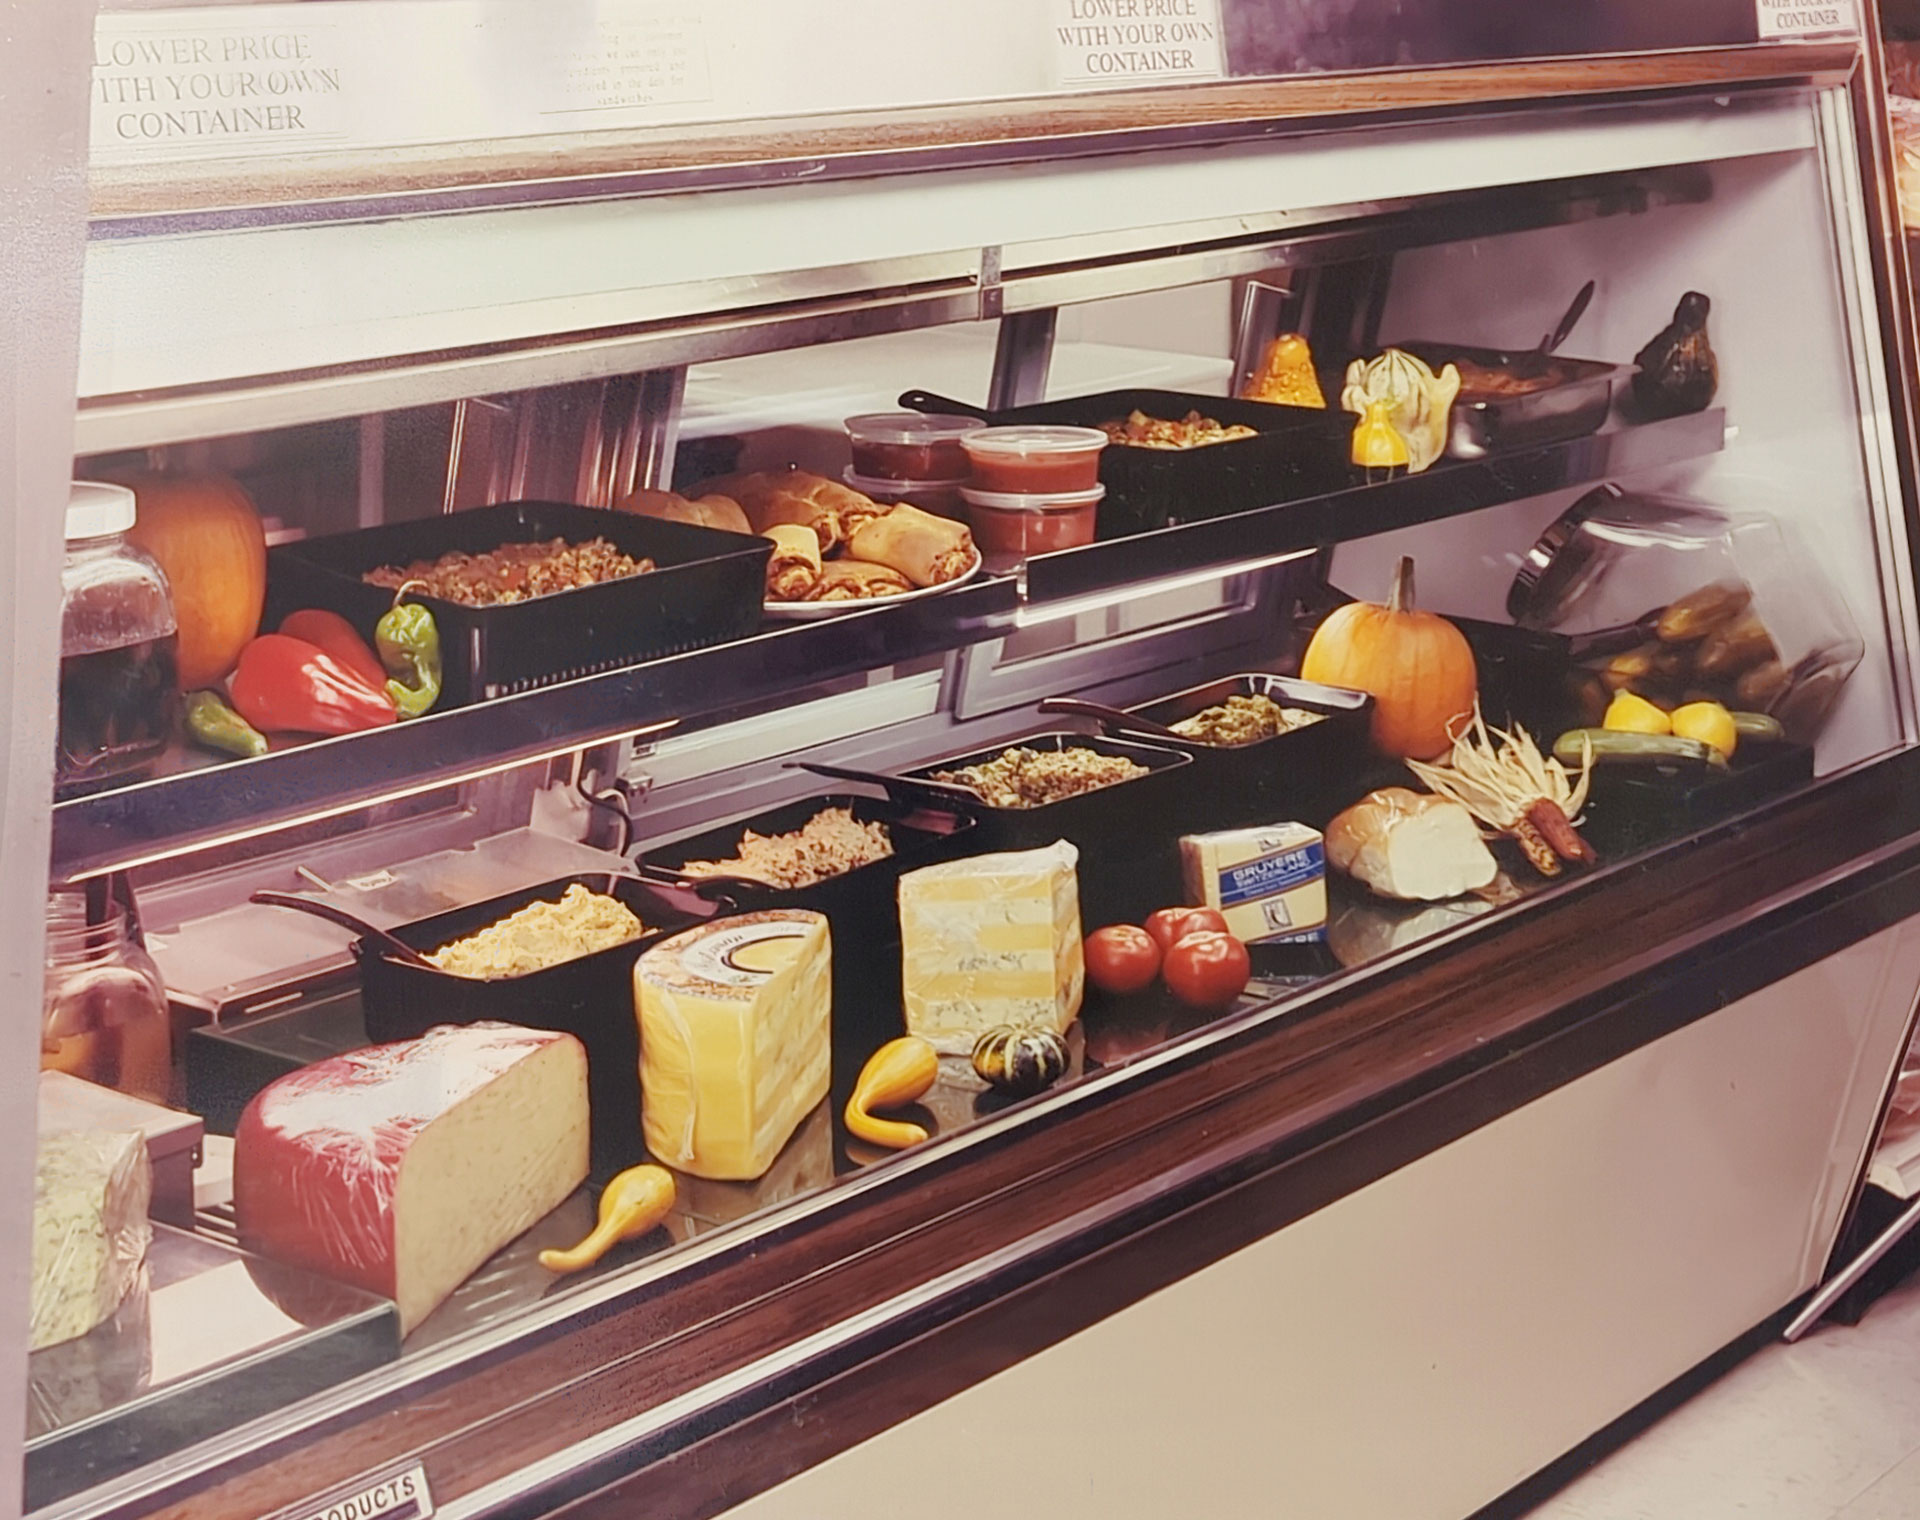 A refrigerated deli display at the Whole Foods Coop in Duluth, MN features cheeses, cured meats, vegetables, and various prepared dishes in black trays. Items include pumpkins, bell peppers, tomatoes, and a variety of cheeses. A sign above reads "Lower price when you bring your own container.